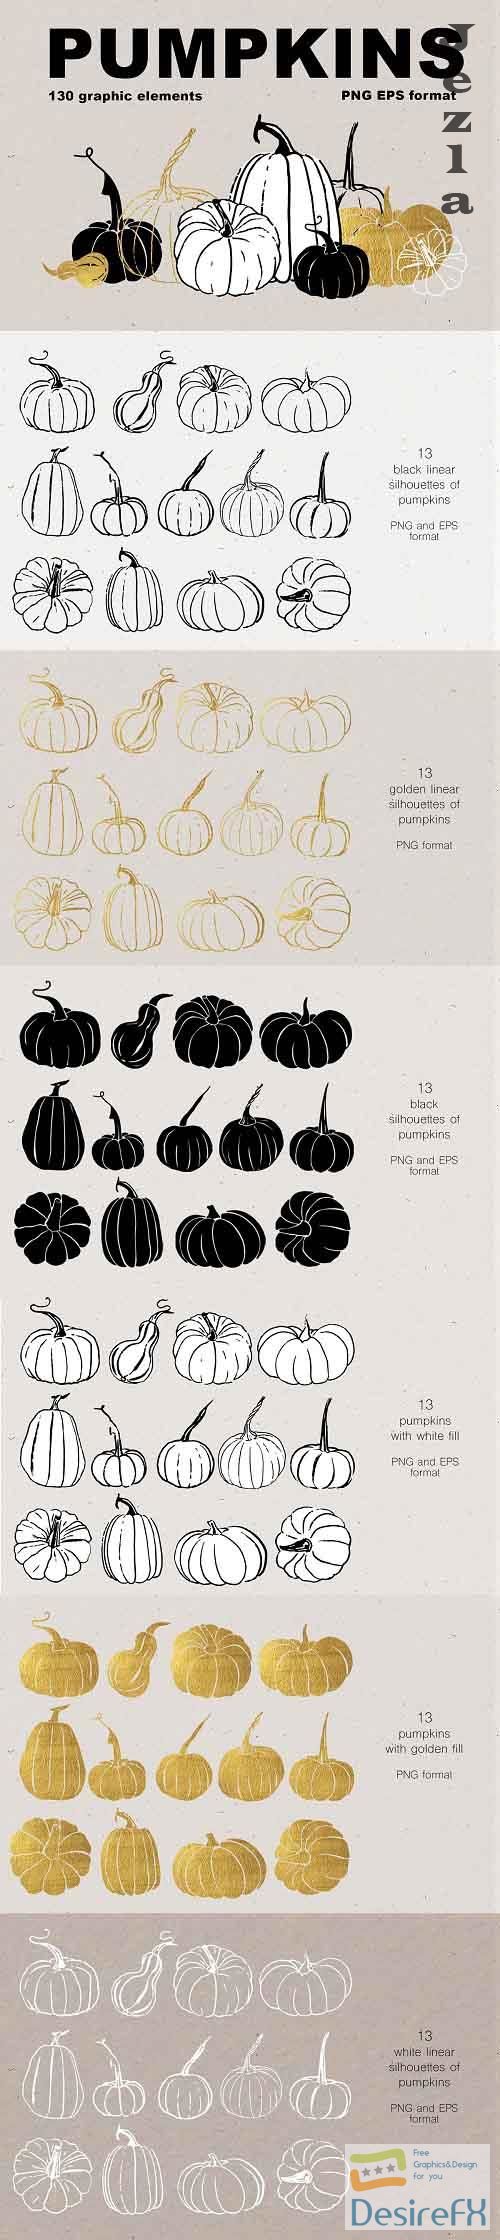 Pumpkins. Graphic collection - 5513384